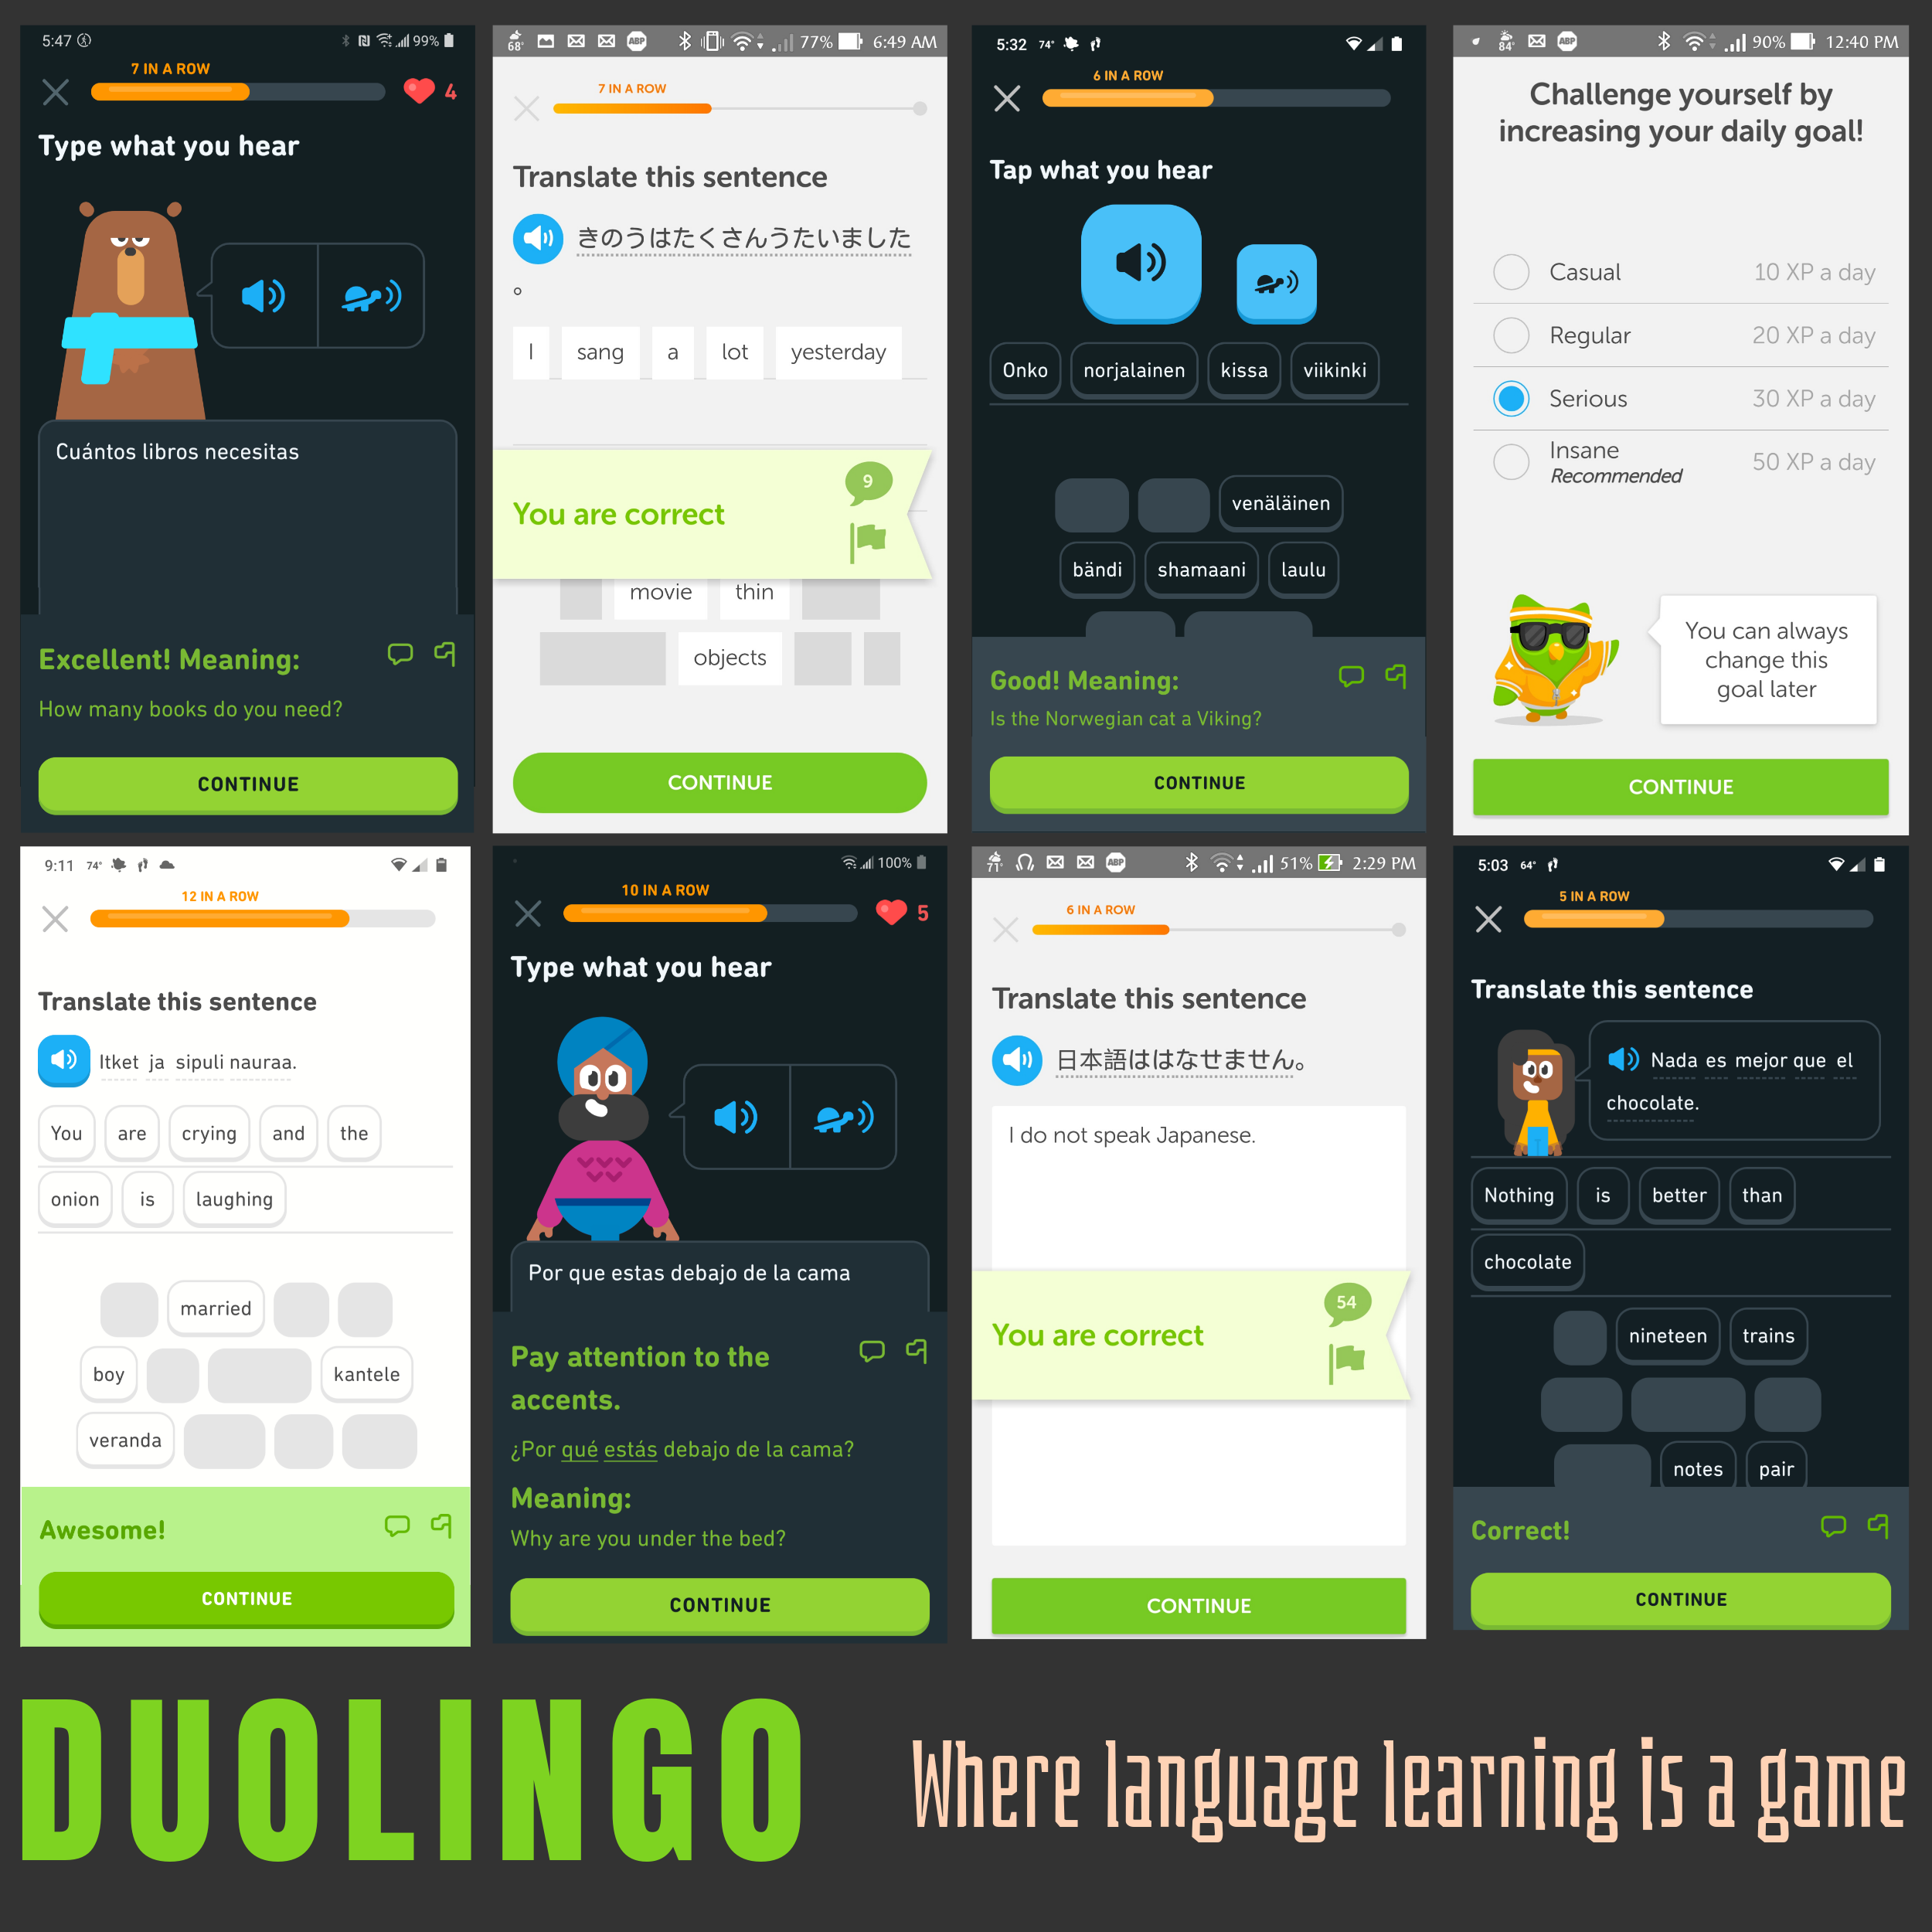 An infographic with the title "Duolingo: Where Language Learning is a Game". The infographic shows several screenshots of Duolingo teaching humorous phrases indifferent languages.